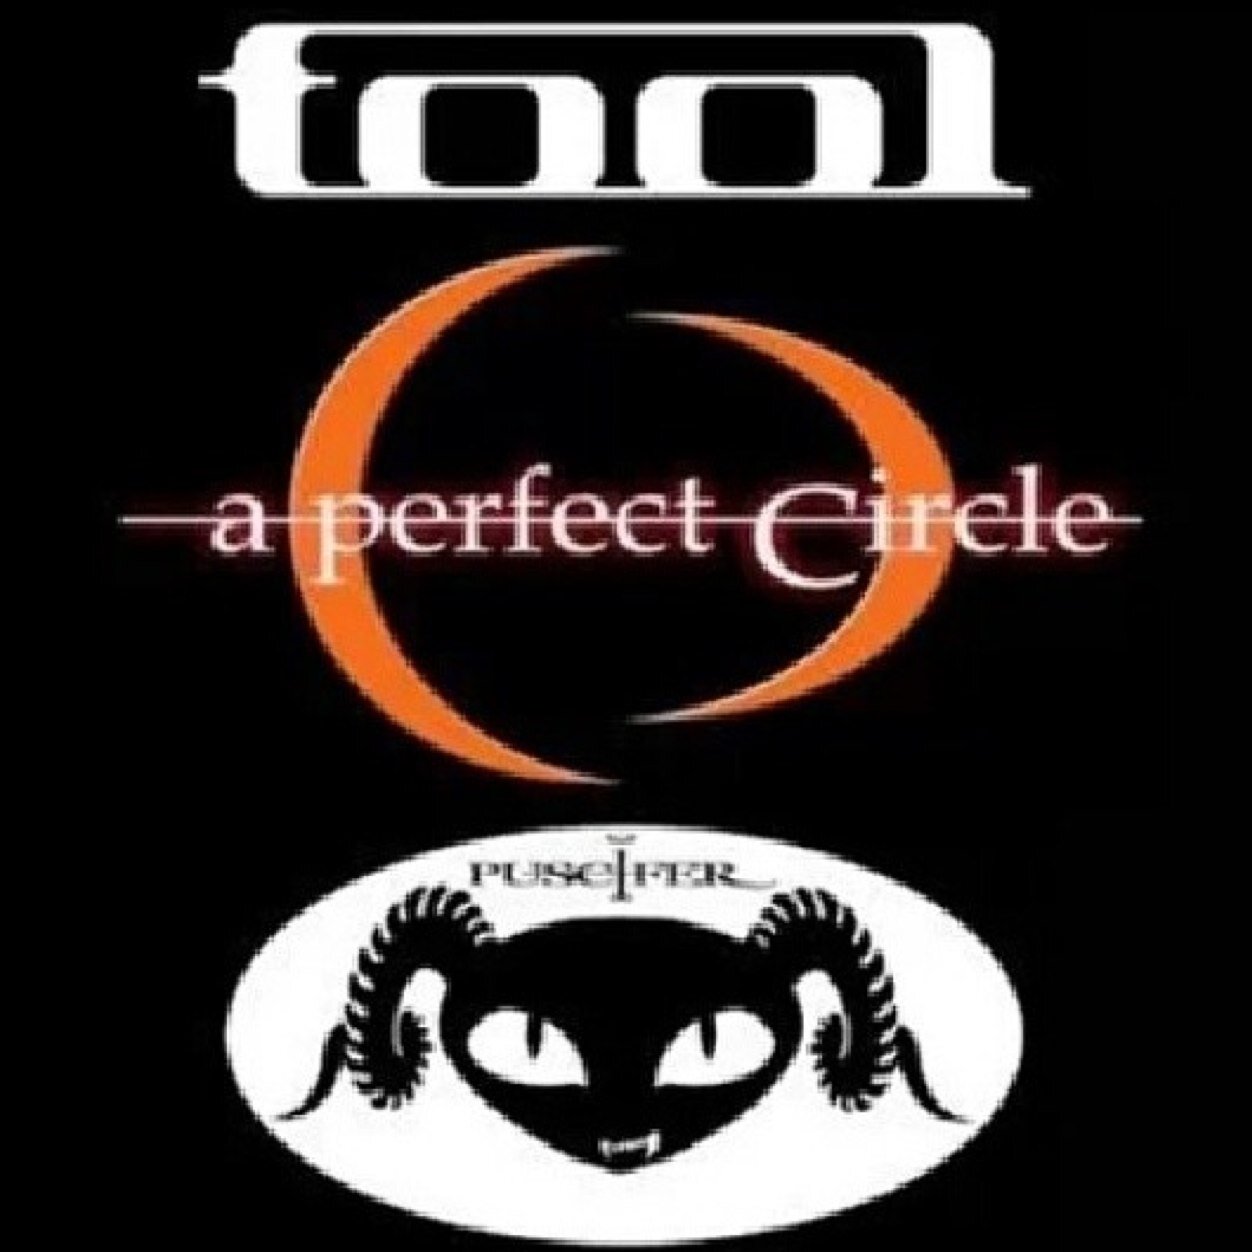 All things Tool~Puscifer~A Perfect Circle including Tour & Album information. Images are intellectual property of the bands. Instagram: ToolPusciferAPC